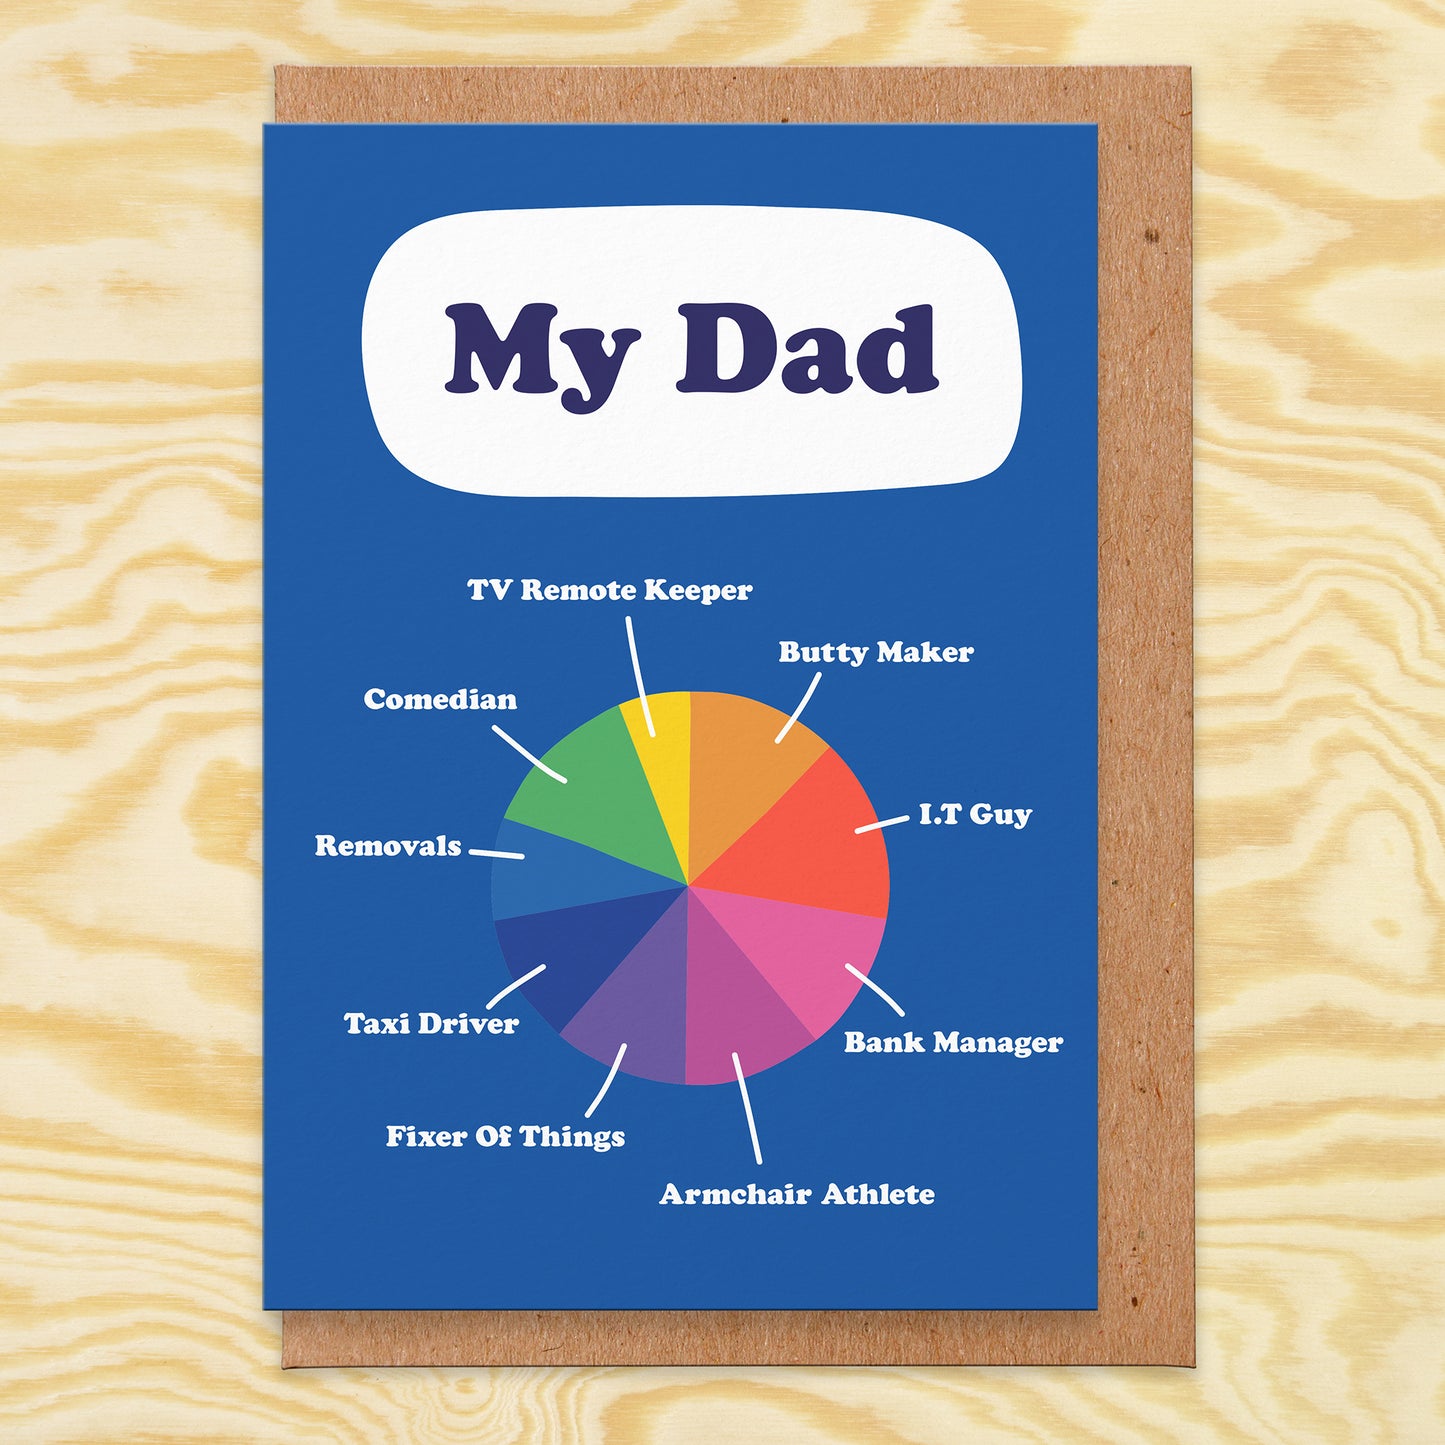 Father's Day card with an illustration of a pie chart and each section has a description e.g TV remote Keeper, Butty Maker, I.T Guy, Bank Manager, Armchair Athlete, Fixer Of Things, Taxi Driver, Removals, Comedian and the card reads My Dad